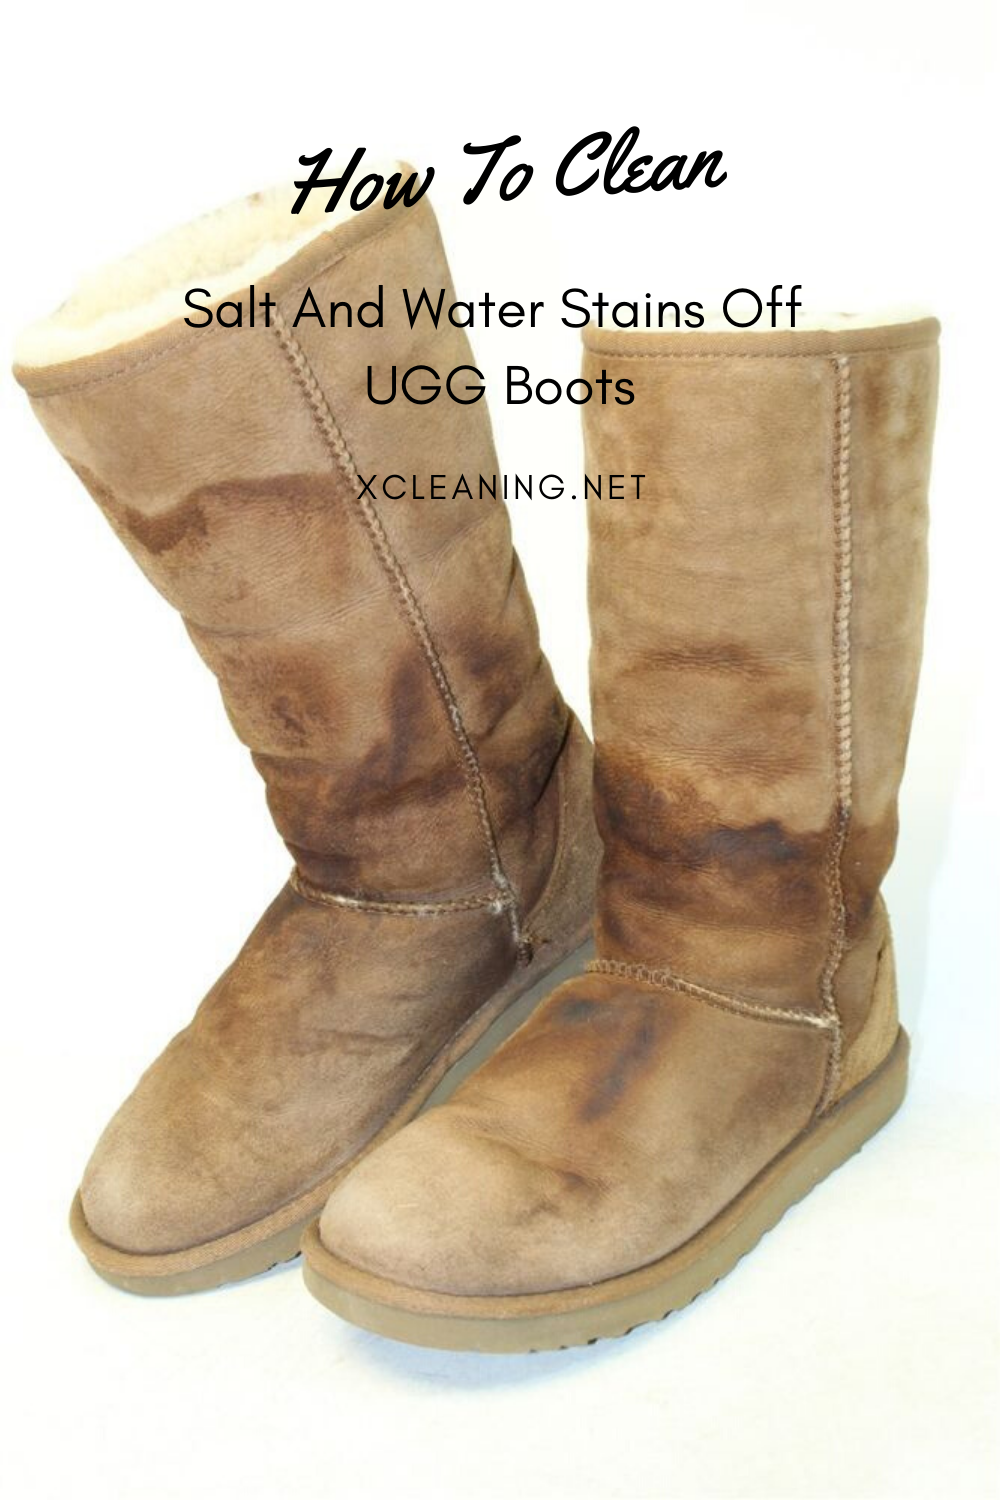 How To Clean Salt And Water Stains Off UGG Boots  xCleaning.net